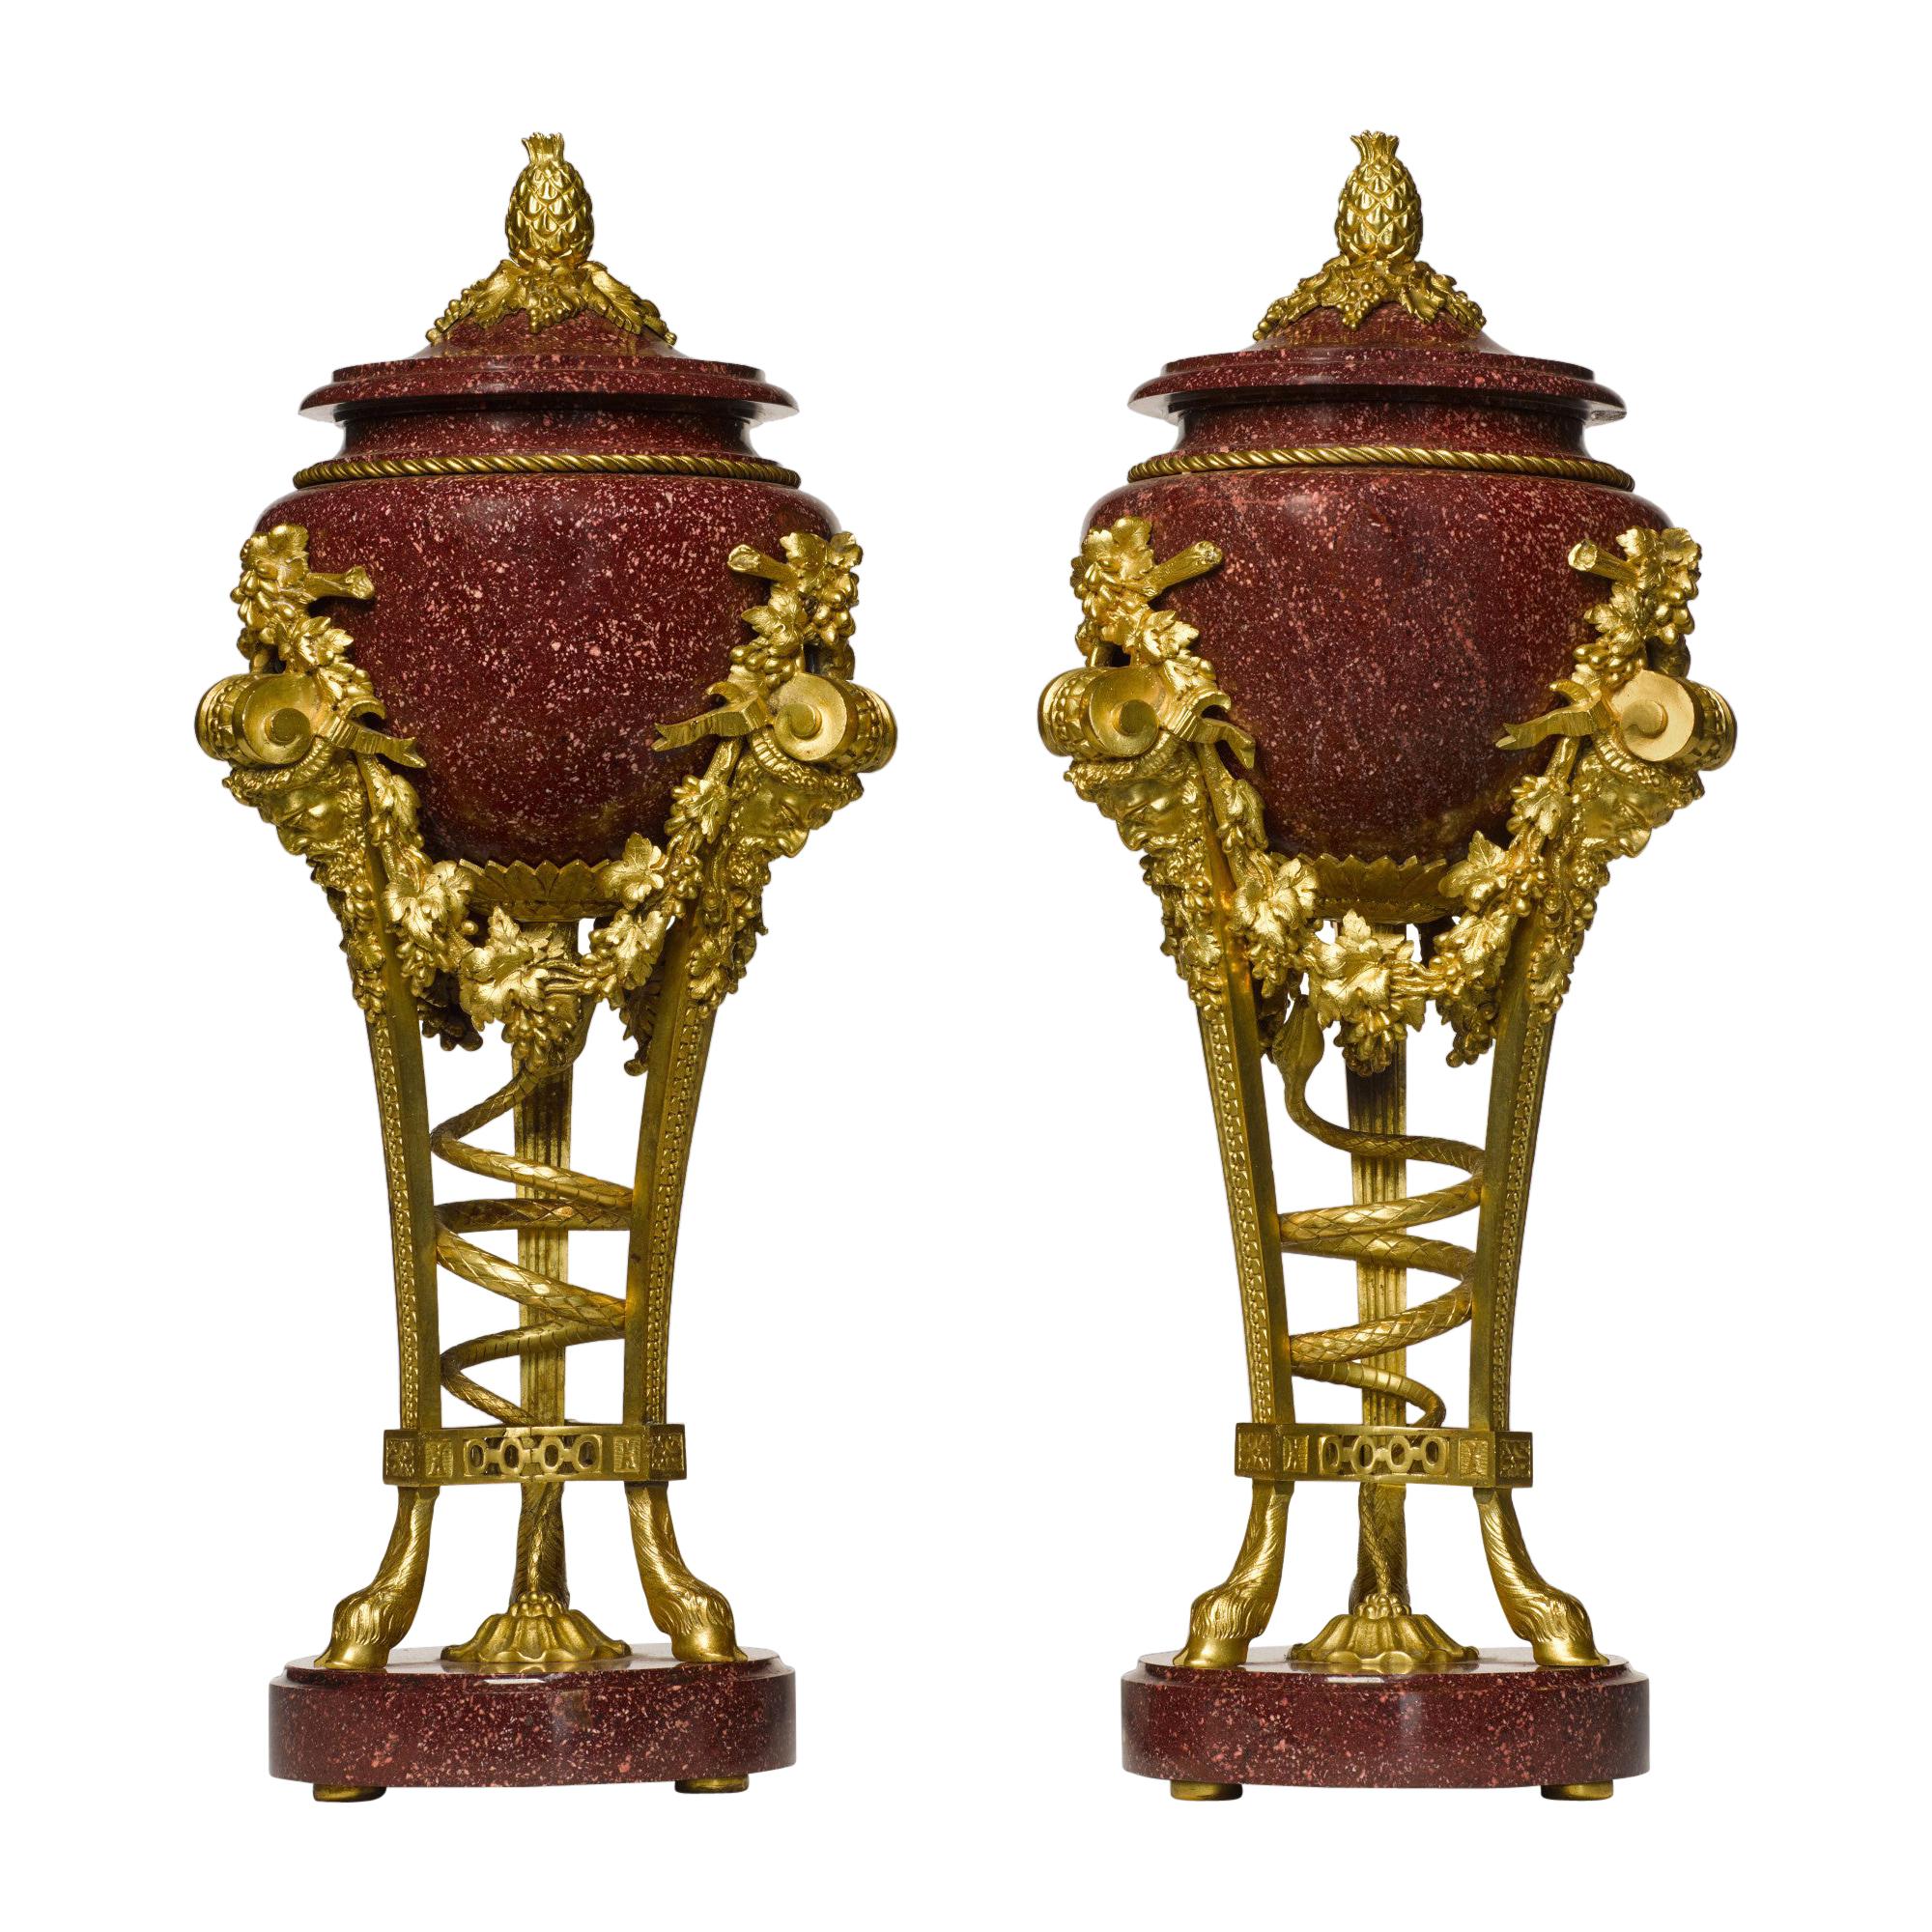 Pair of Louis XVI Style Porphyry Urns, after Pierre Gouthière